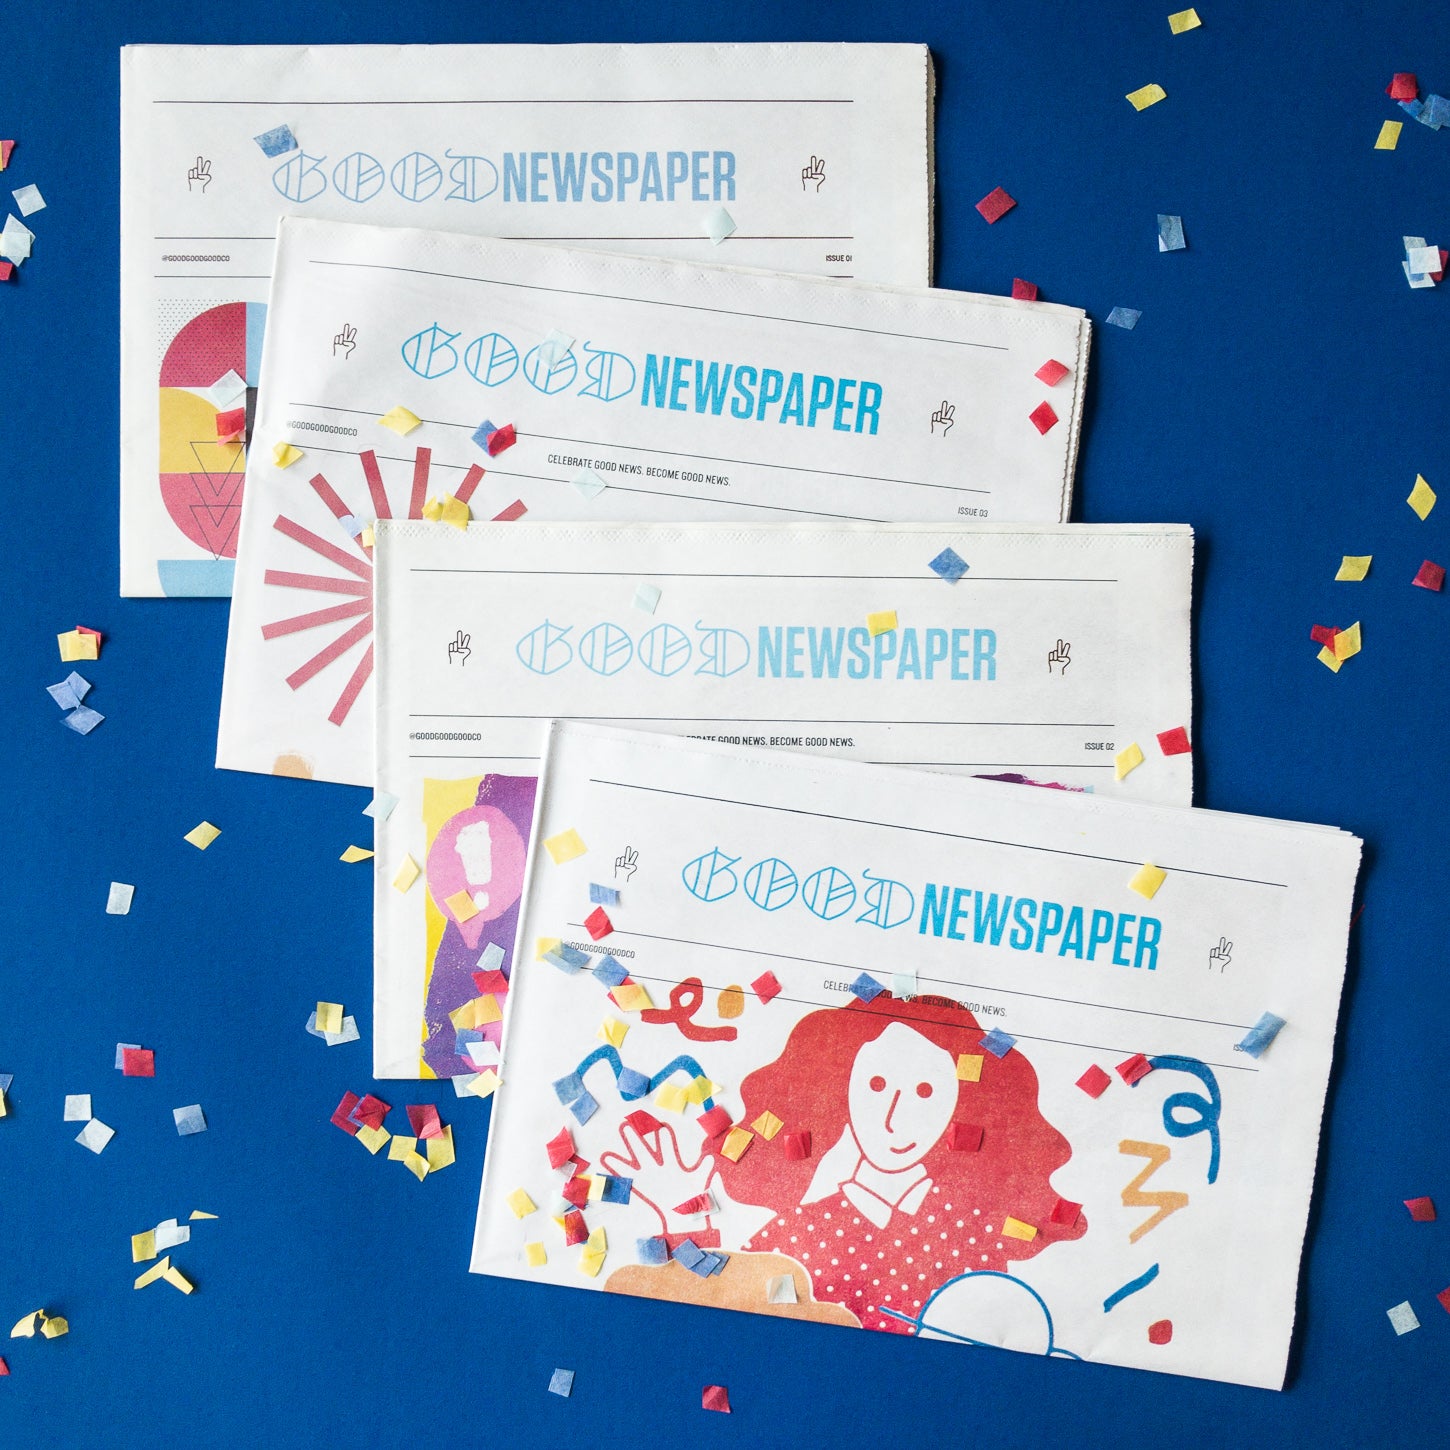 Goodnewspaper - A newspaper filled with good, positive news